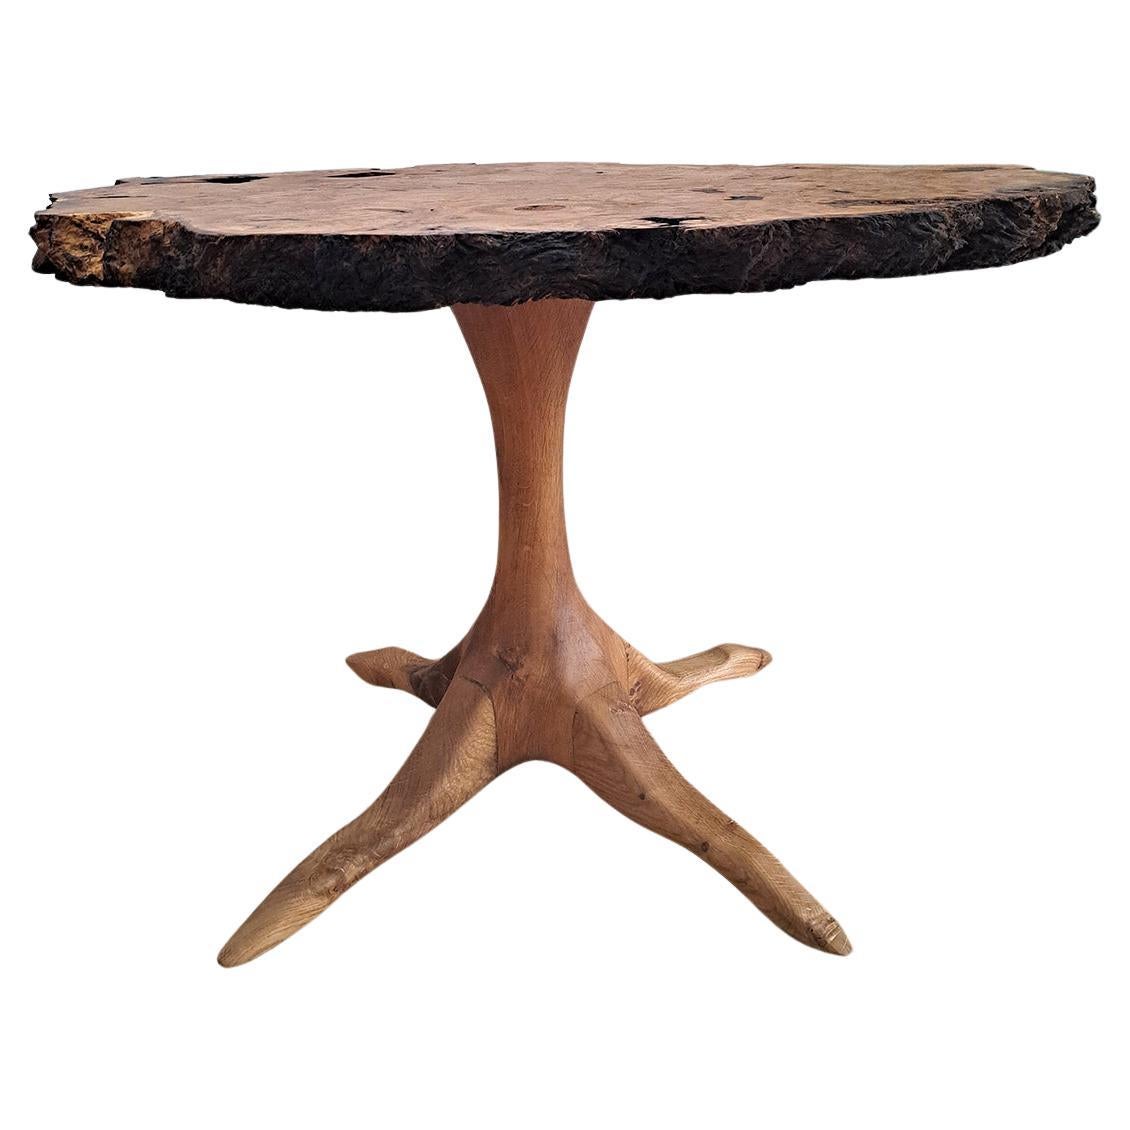 Very elegant live edge elm burl side table. Knotty wood creates this brutalist-style table. Turned base standing on four carved feet also in elm, resembling a bird's feet. Designed by John Alfredo Harris British designer.  Signed.
